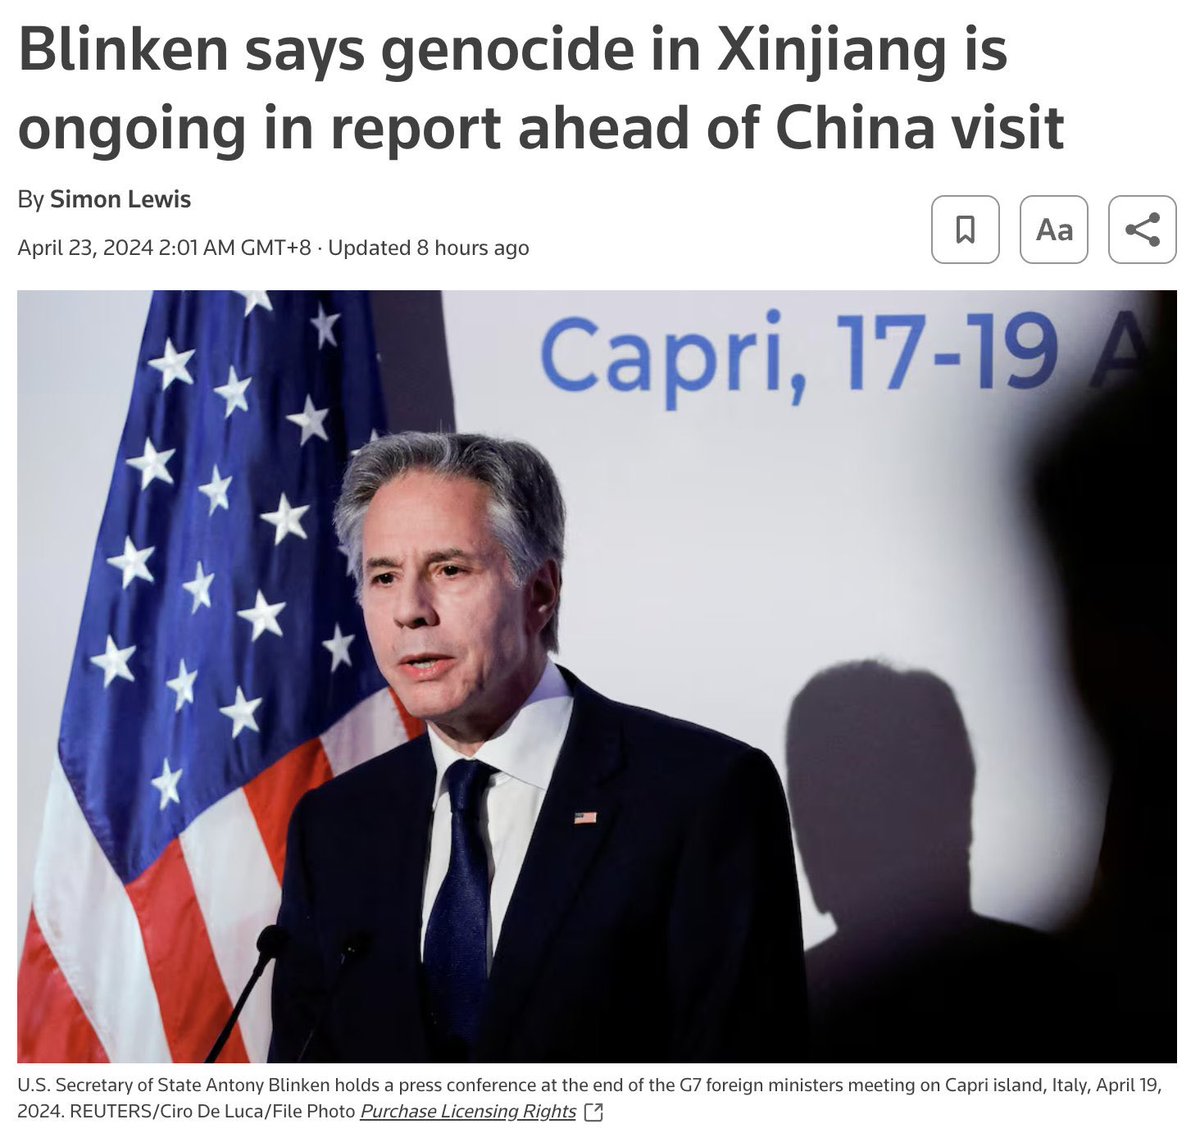 “We will scream XINJIANG GENOCIDE, until you do what we want re: Russia, Iran, exports etc.” When US establishment lies, it doesn’t get banned on social media for spreading disinformation. Because, global social media are run by Americans. Blinken is just using blackmail